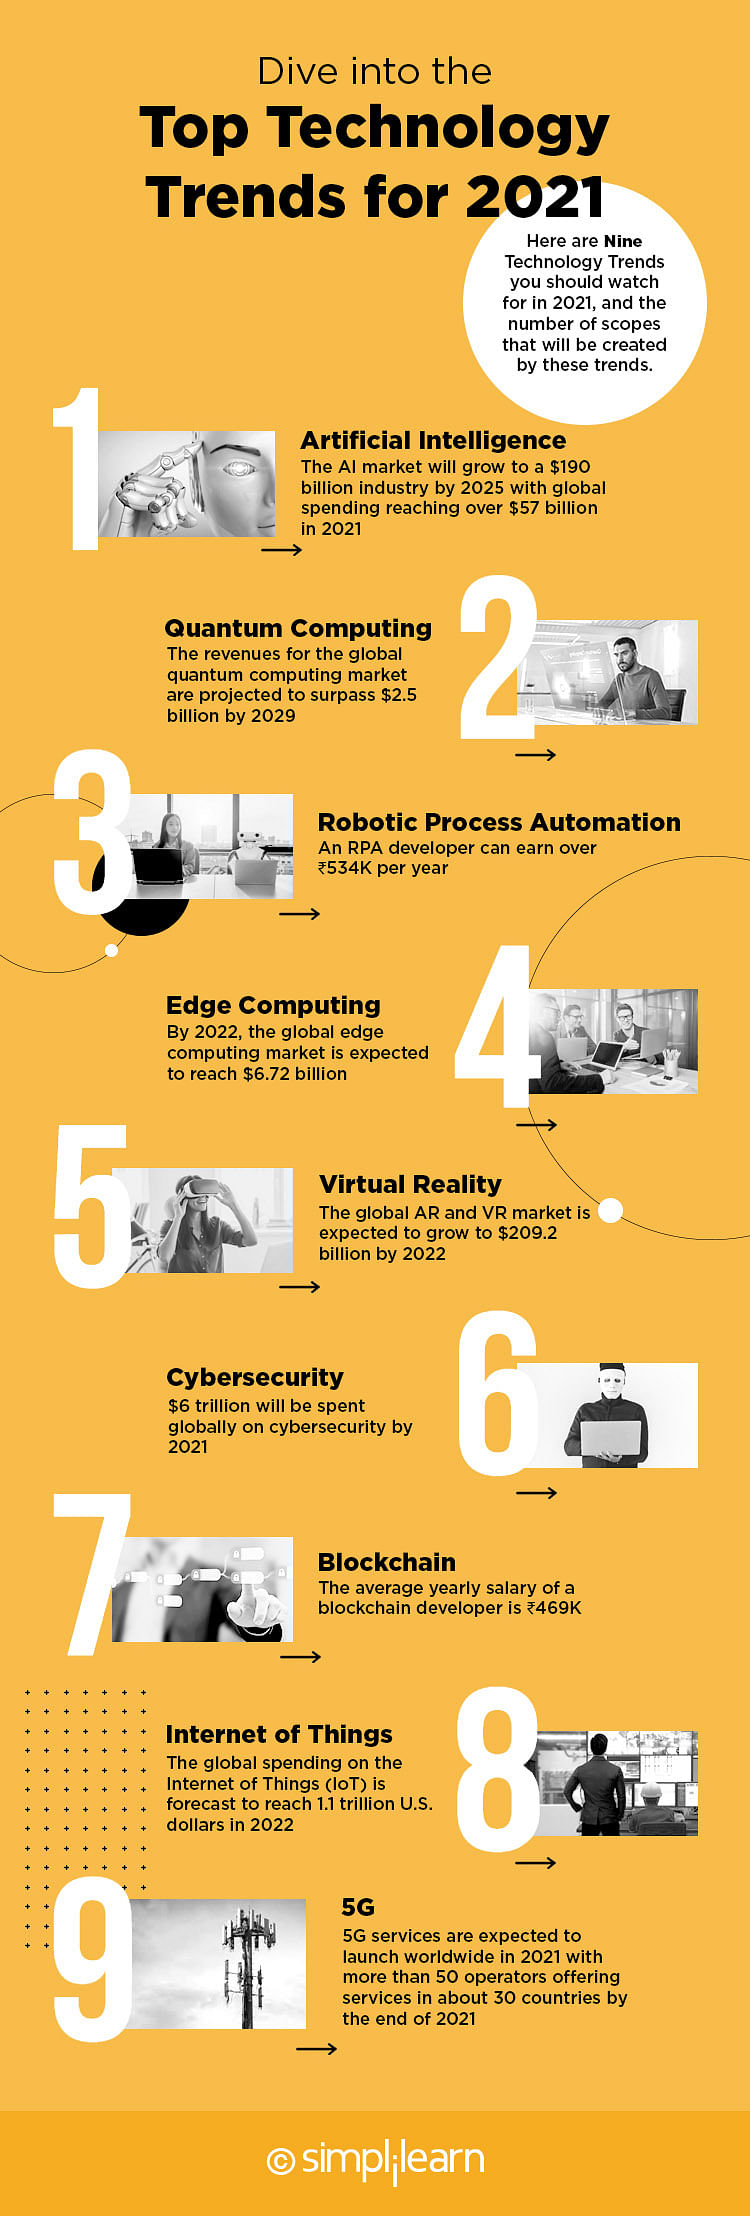 Top 9 New Technology Trends for 2021 Smplilearn